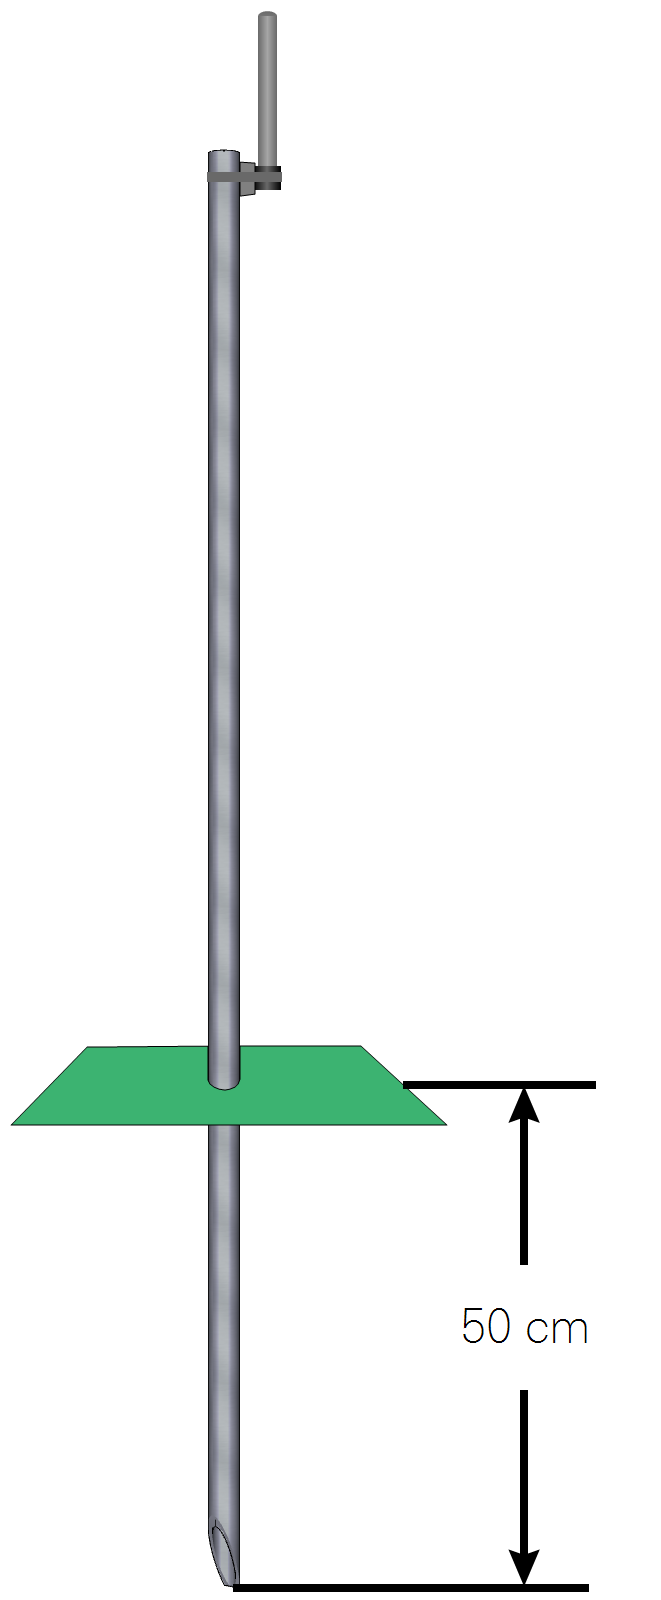 Drive the post about 50 cm into the ground.